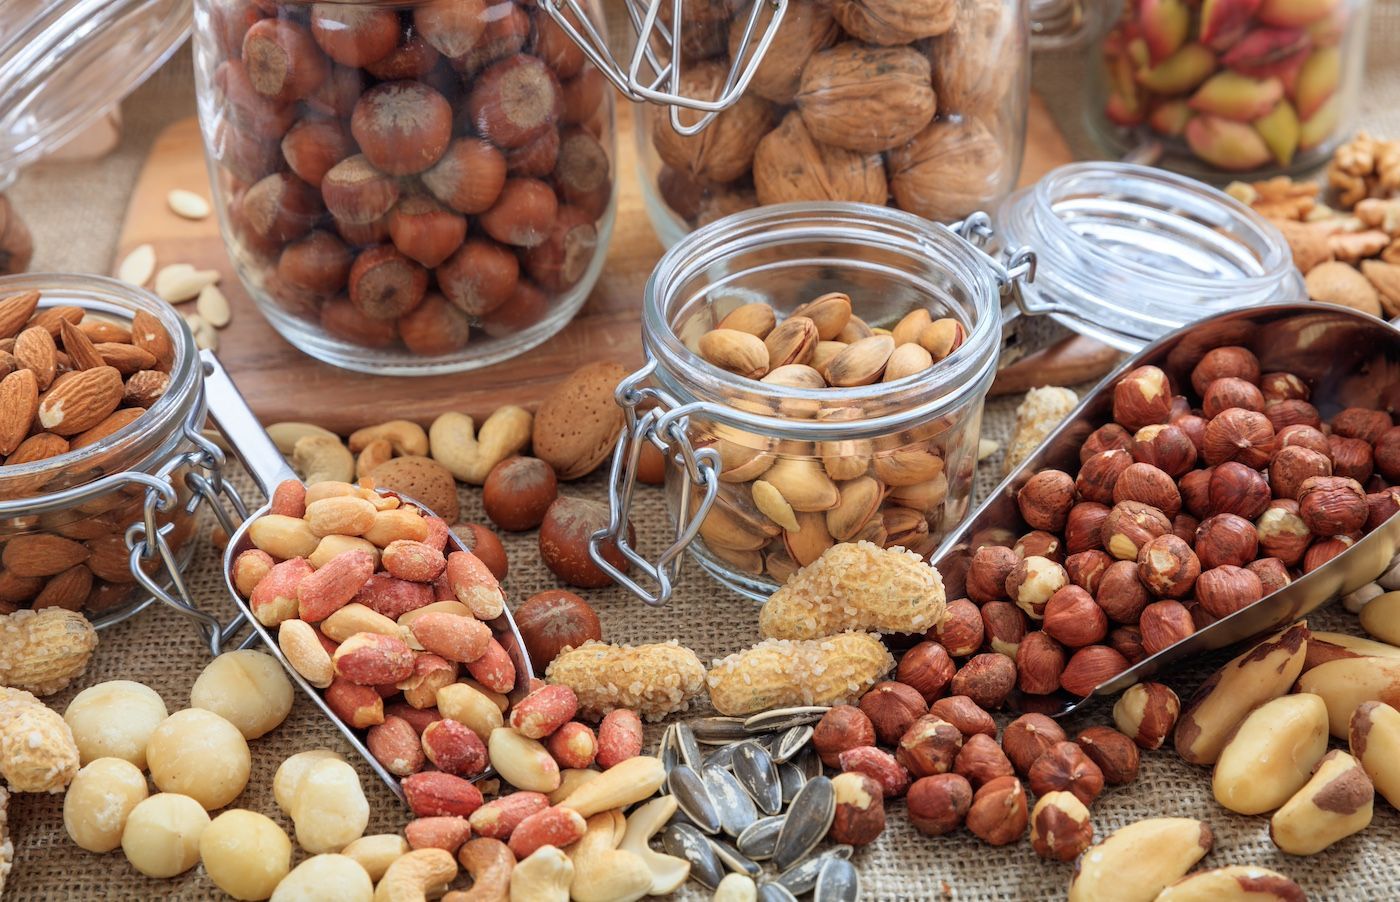 Nuts, a Favored Snack, Versatile on Various Diets, Offer Health Benefits Despite High Fat Content.